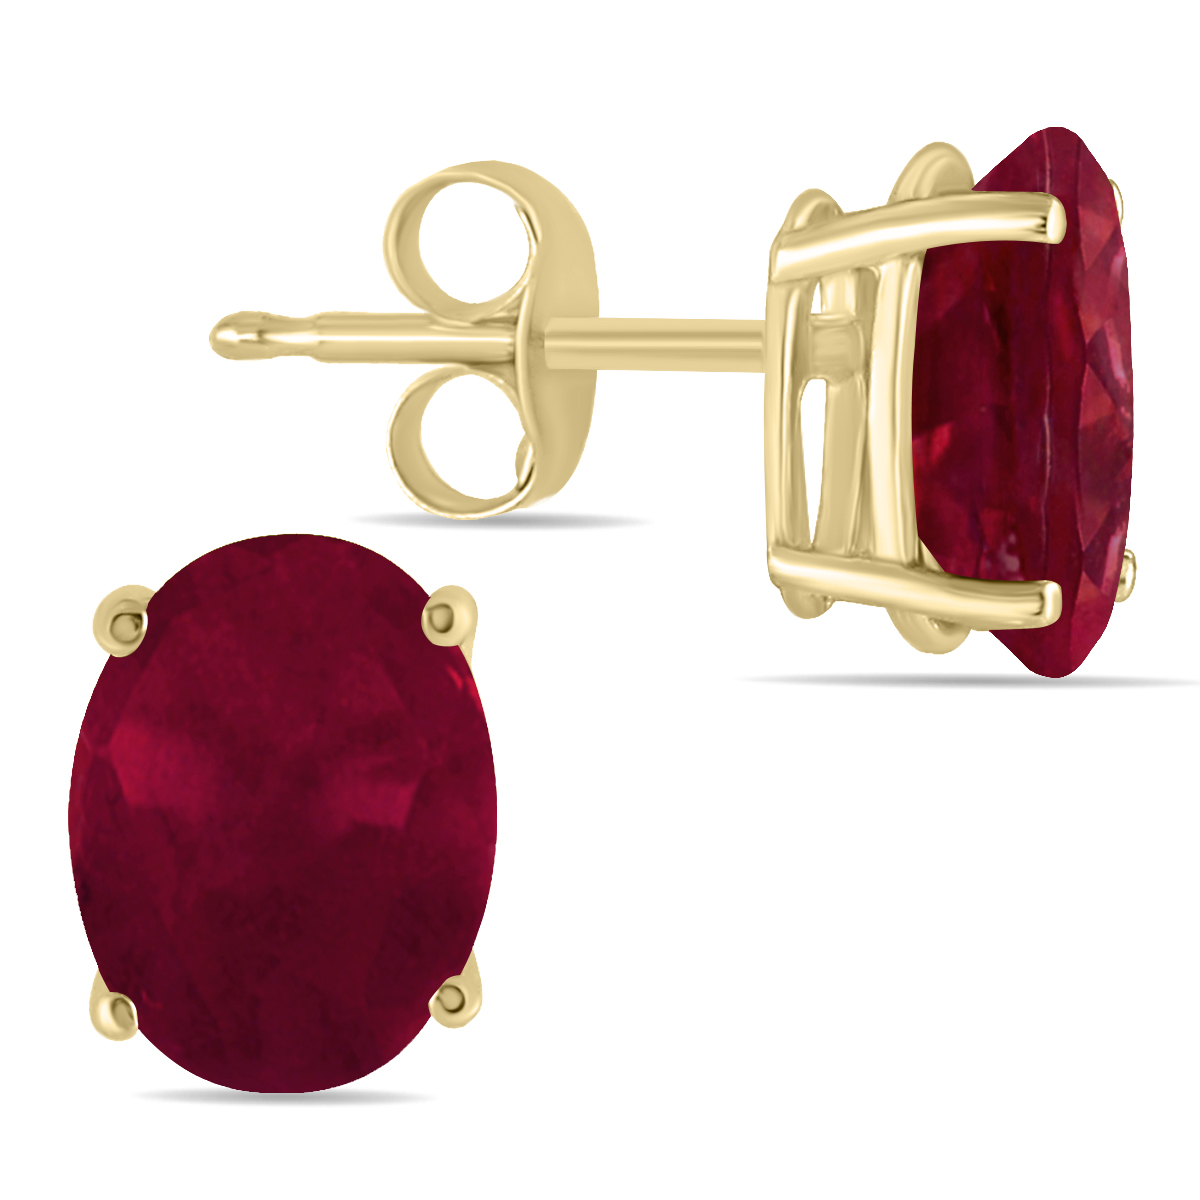 Image of All-Natural Genuine 6x4 mm Oval Ruby earrings set in 14k Yellow gold